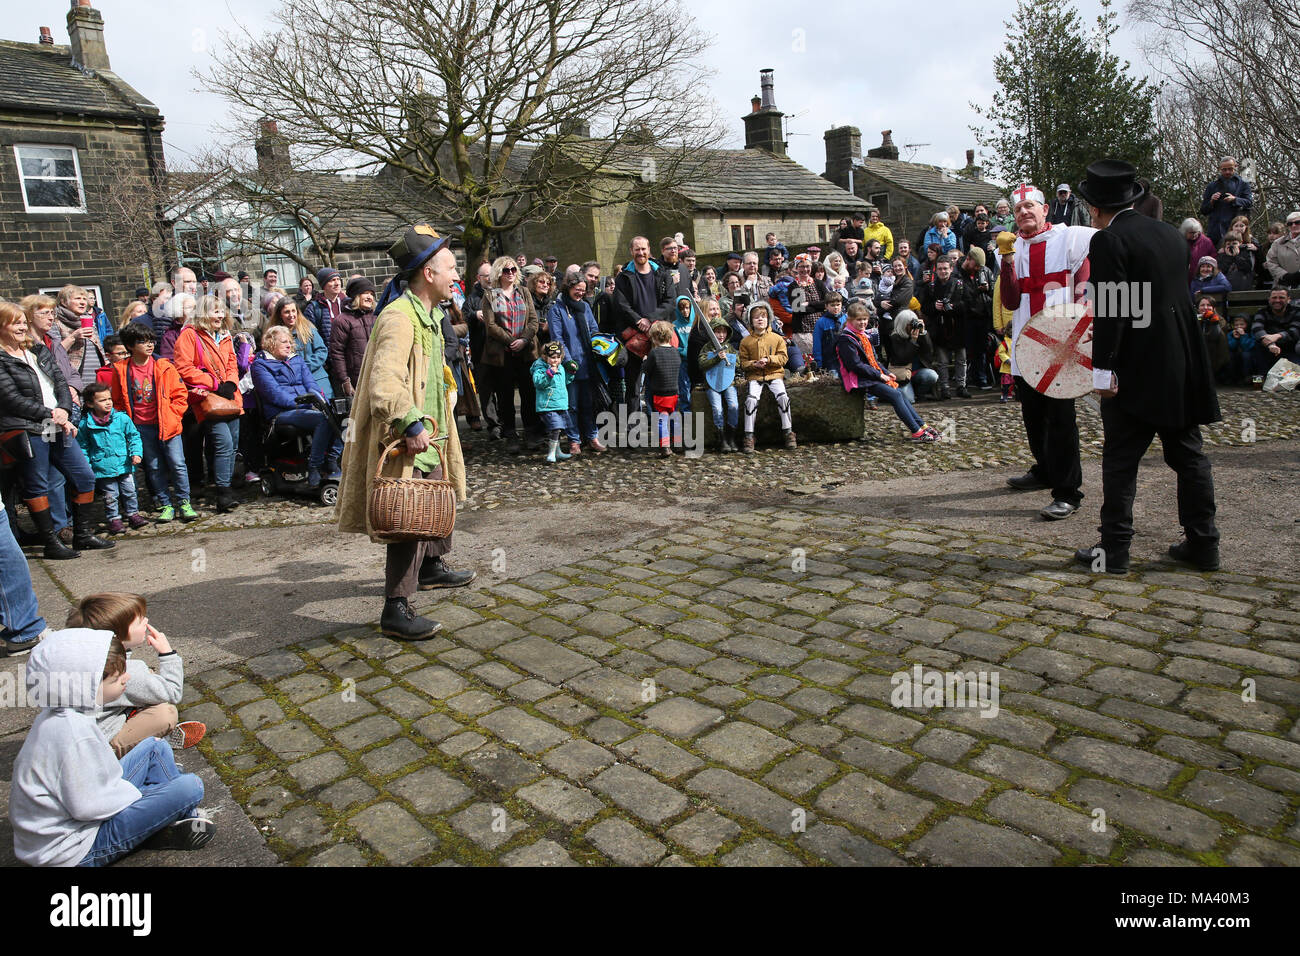 Heptonstall, UK. 30th March, 2018. The Heptonstall Players entertain with the annual traditional Pace Egg Play taking place throughout Good Friday in the historical village of Heptonstall, 30th March, 2018 (C)Barbara Cook/Alamy Live News Stock Photo